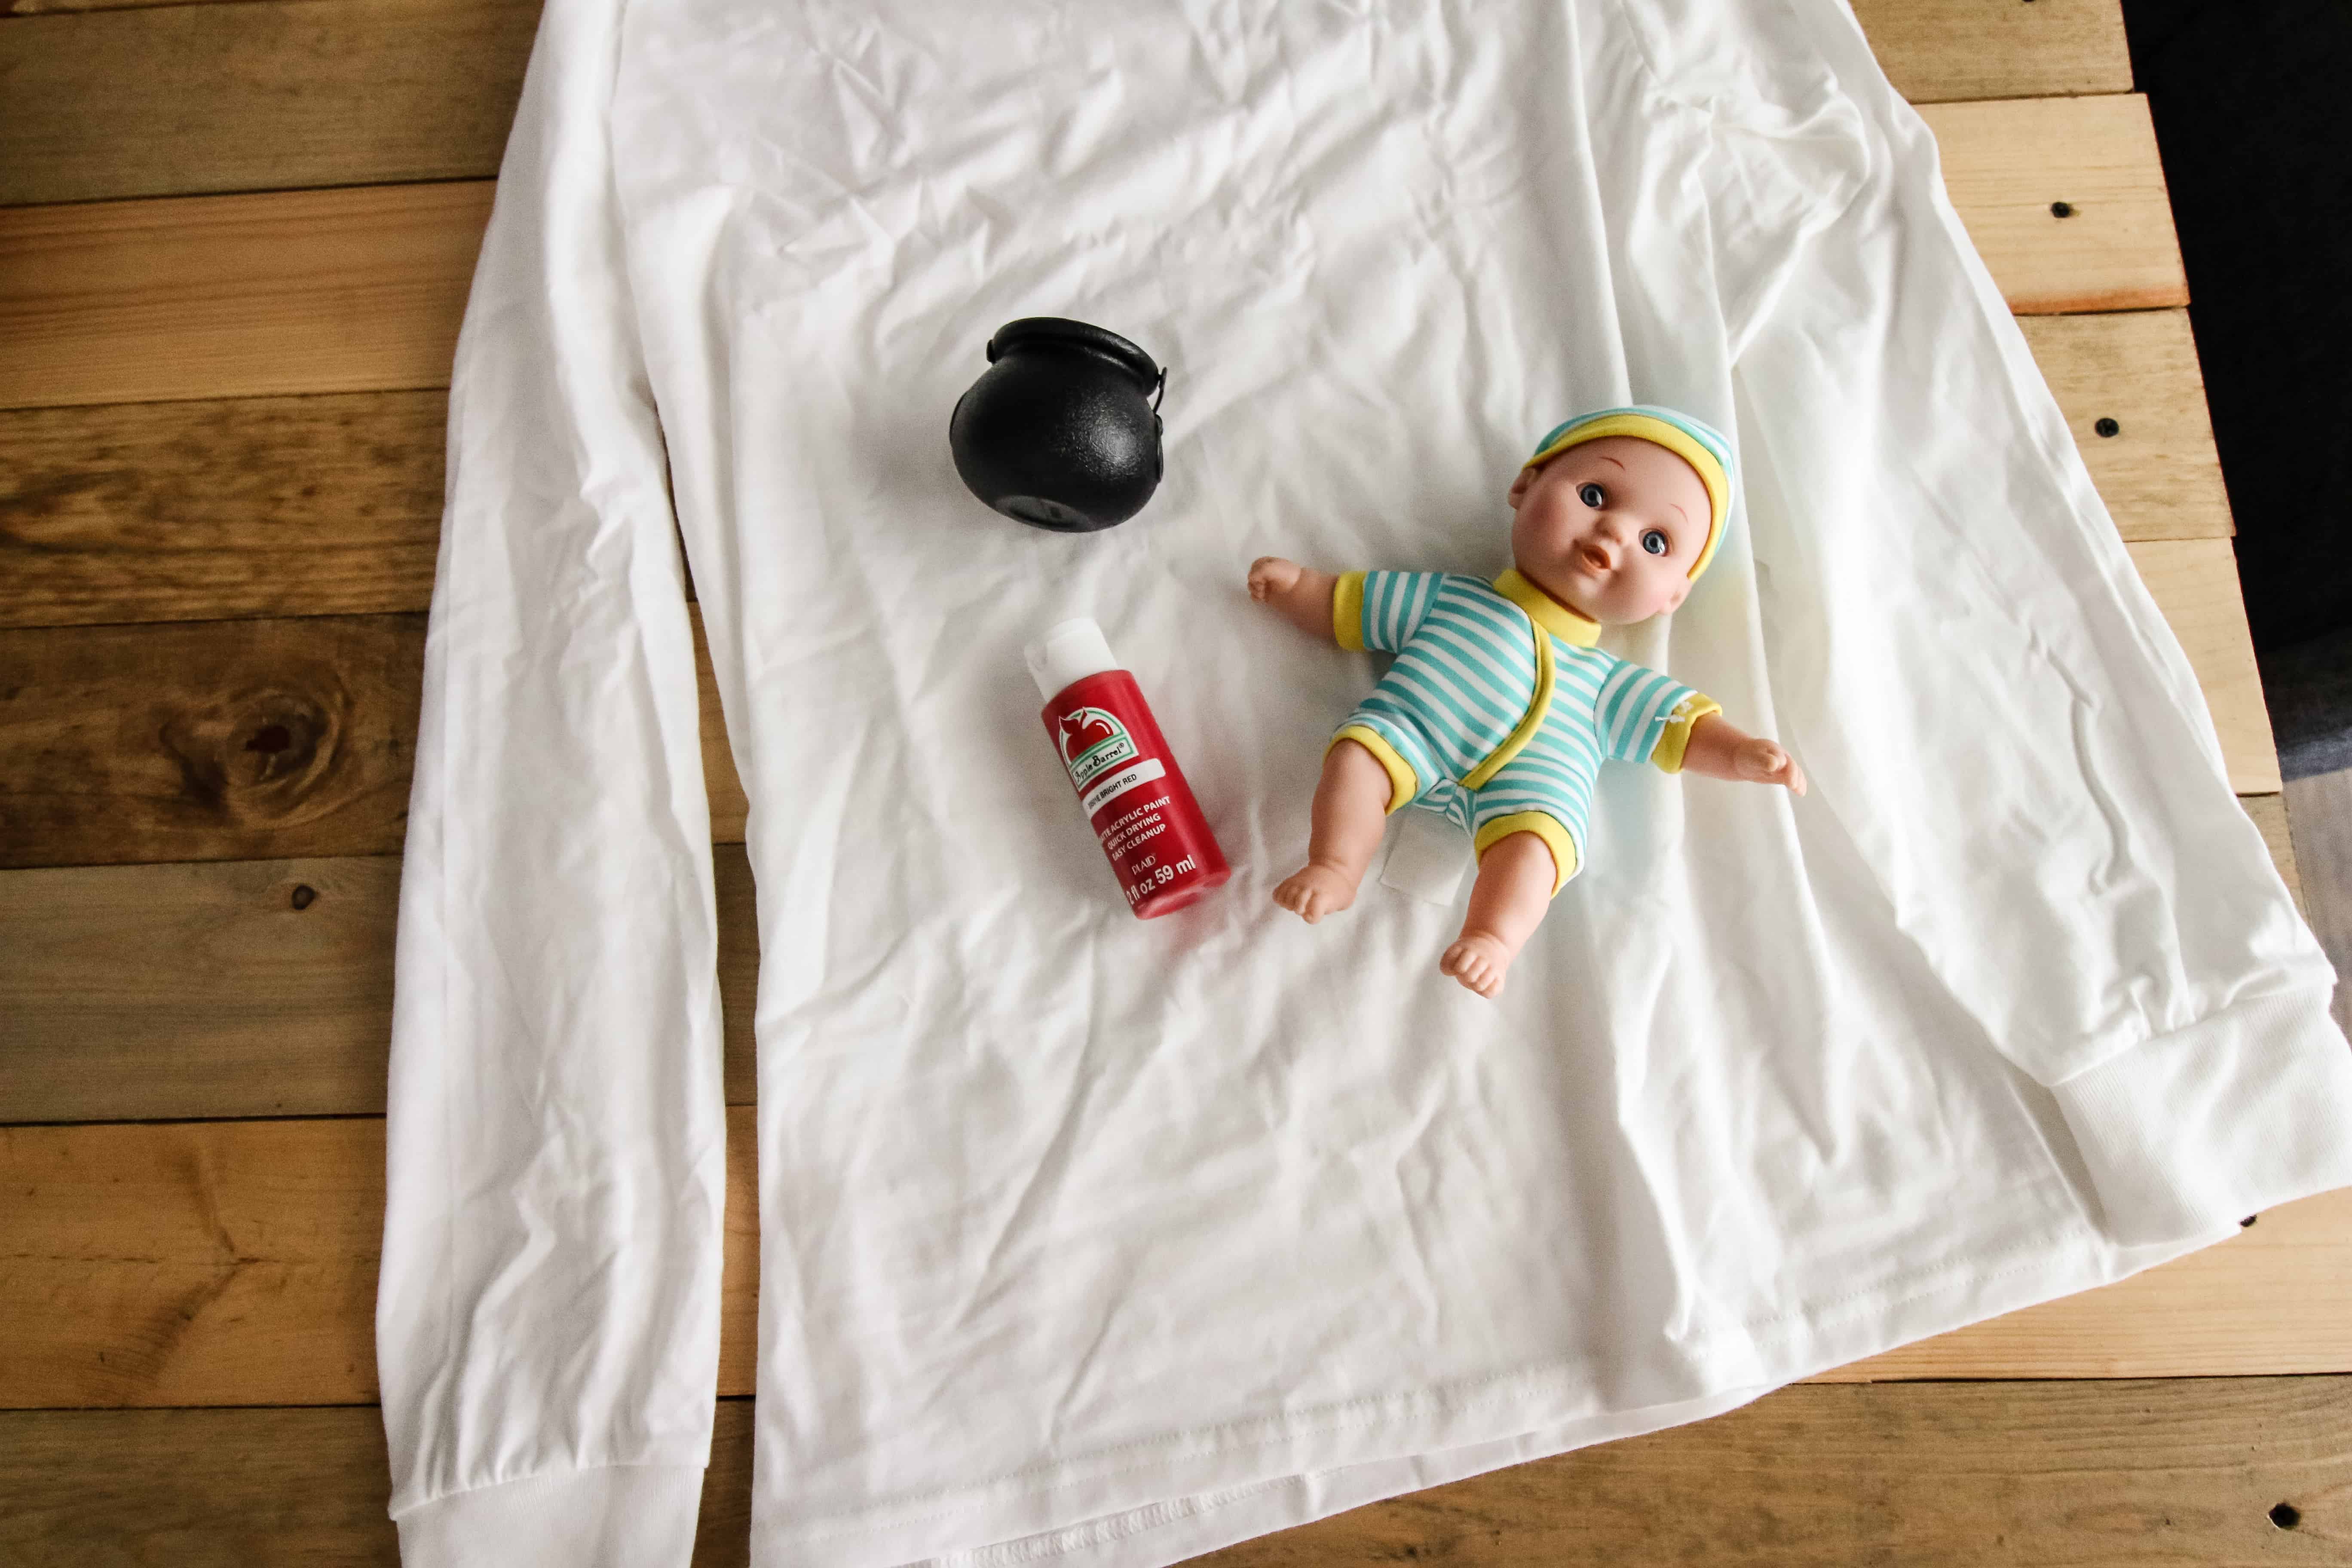 How to DIY a Halloween costume for a baby to escape zombies during pregnancy